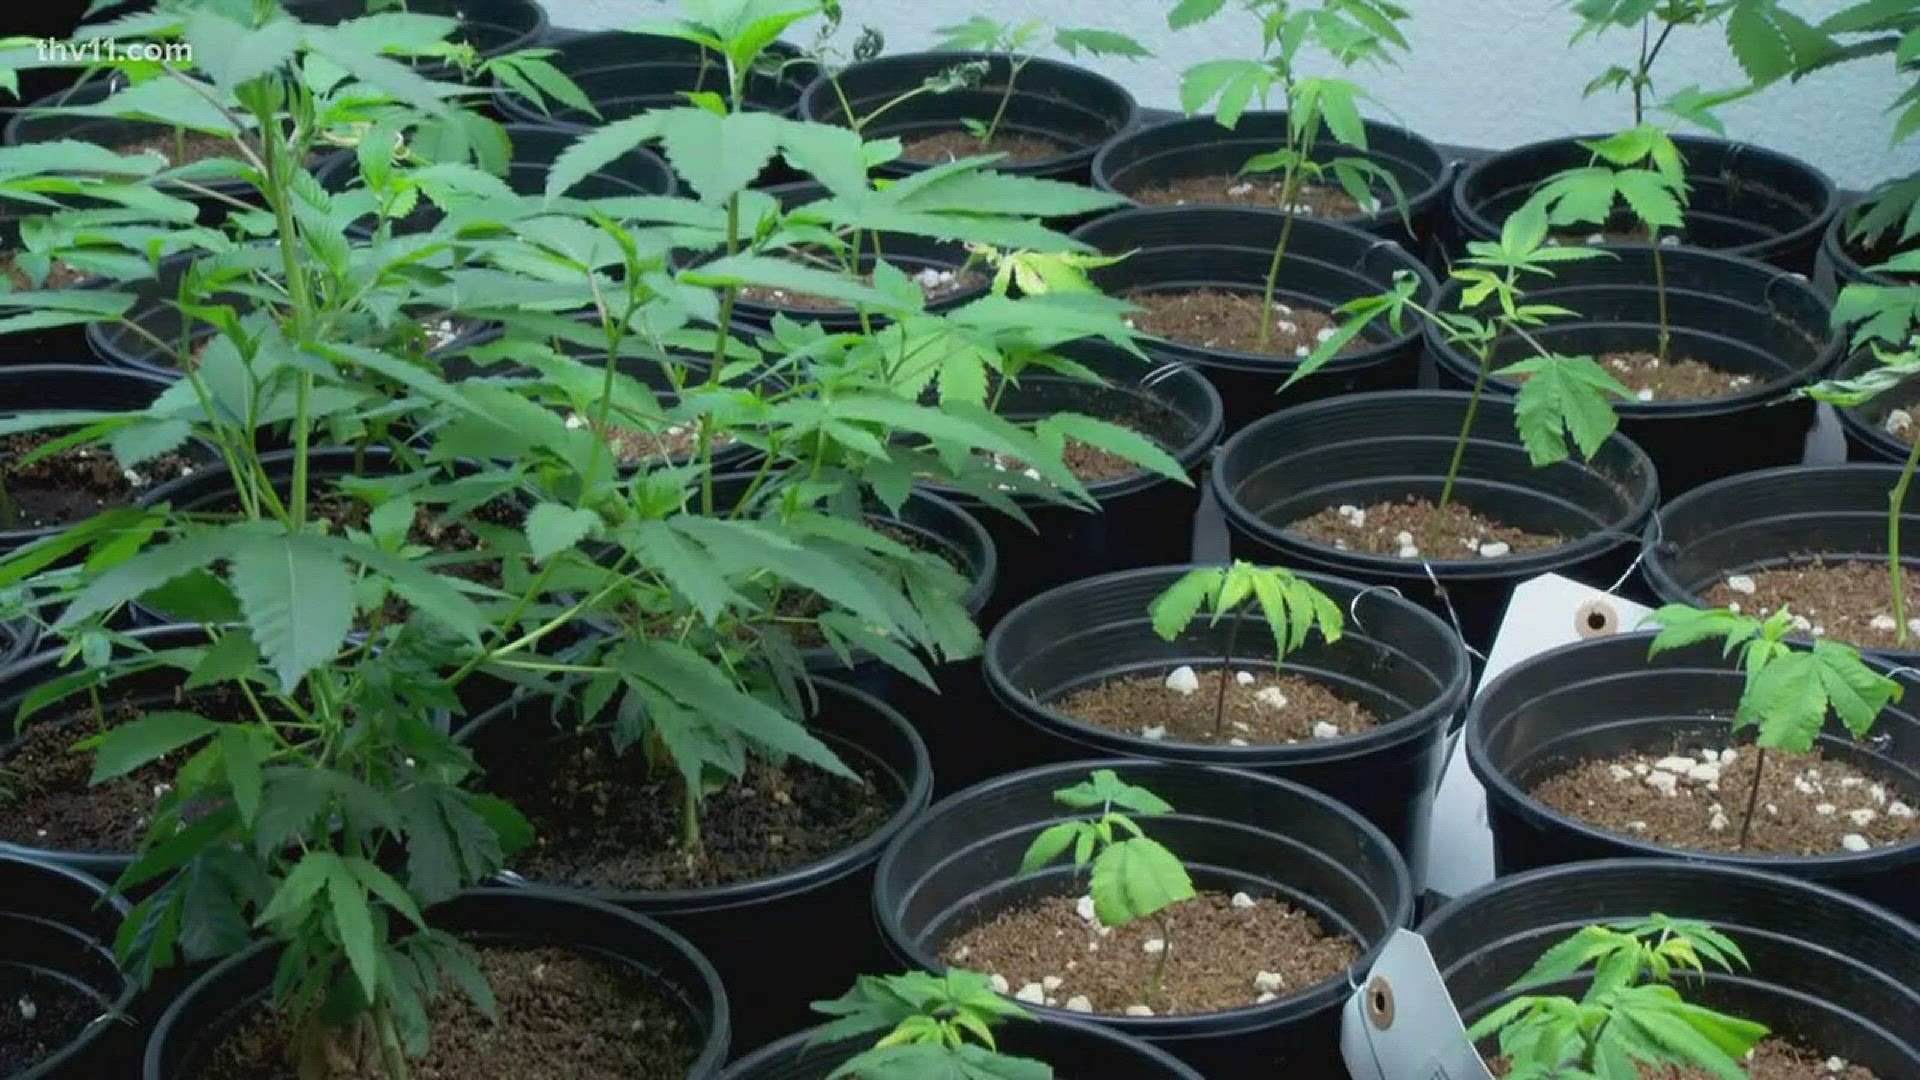 A year after a medical marijuana law was passed, patients are still waiting to get the drug.